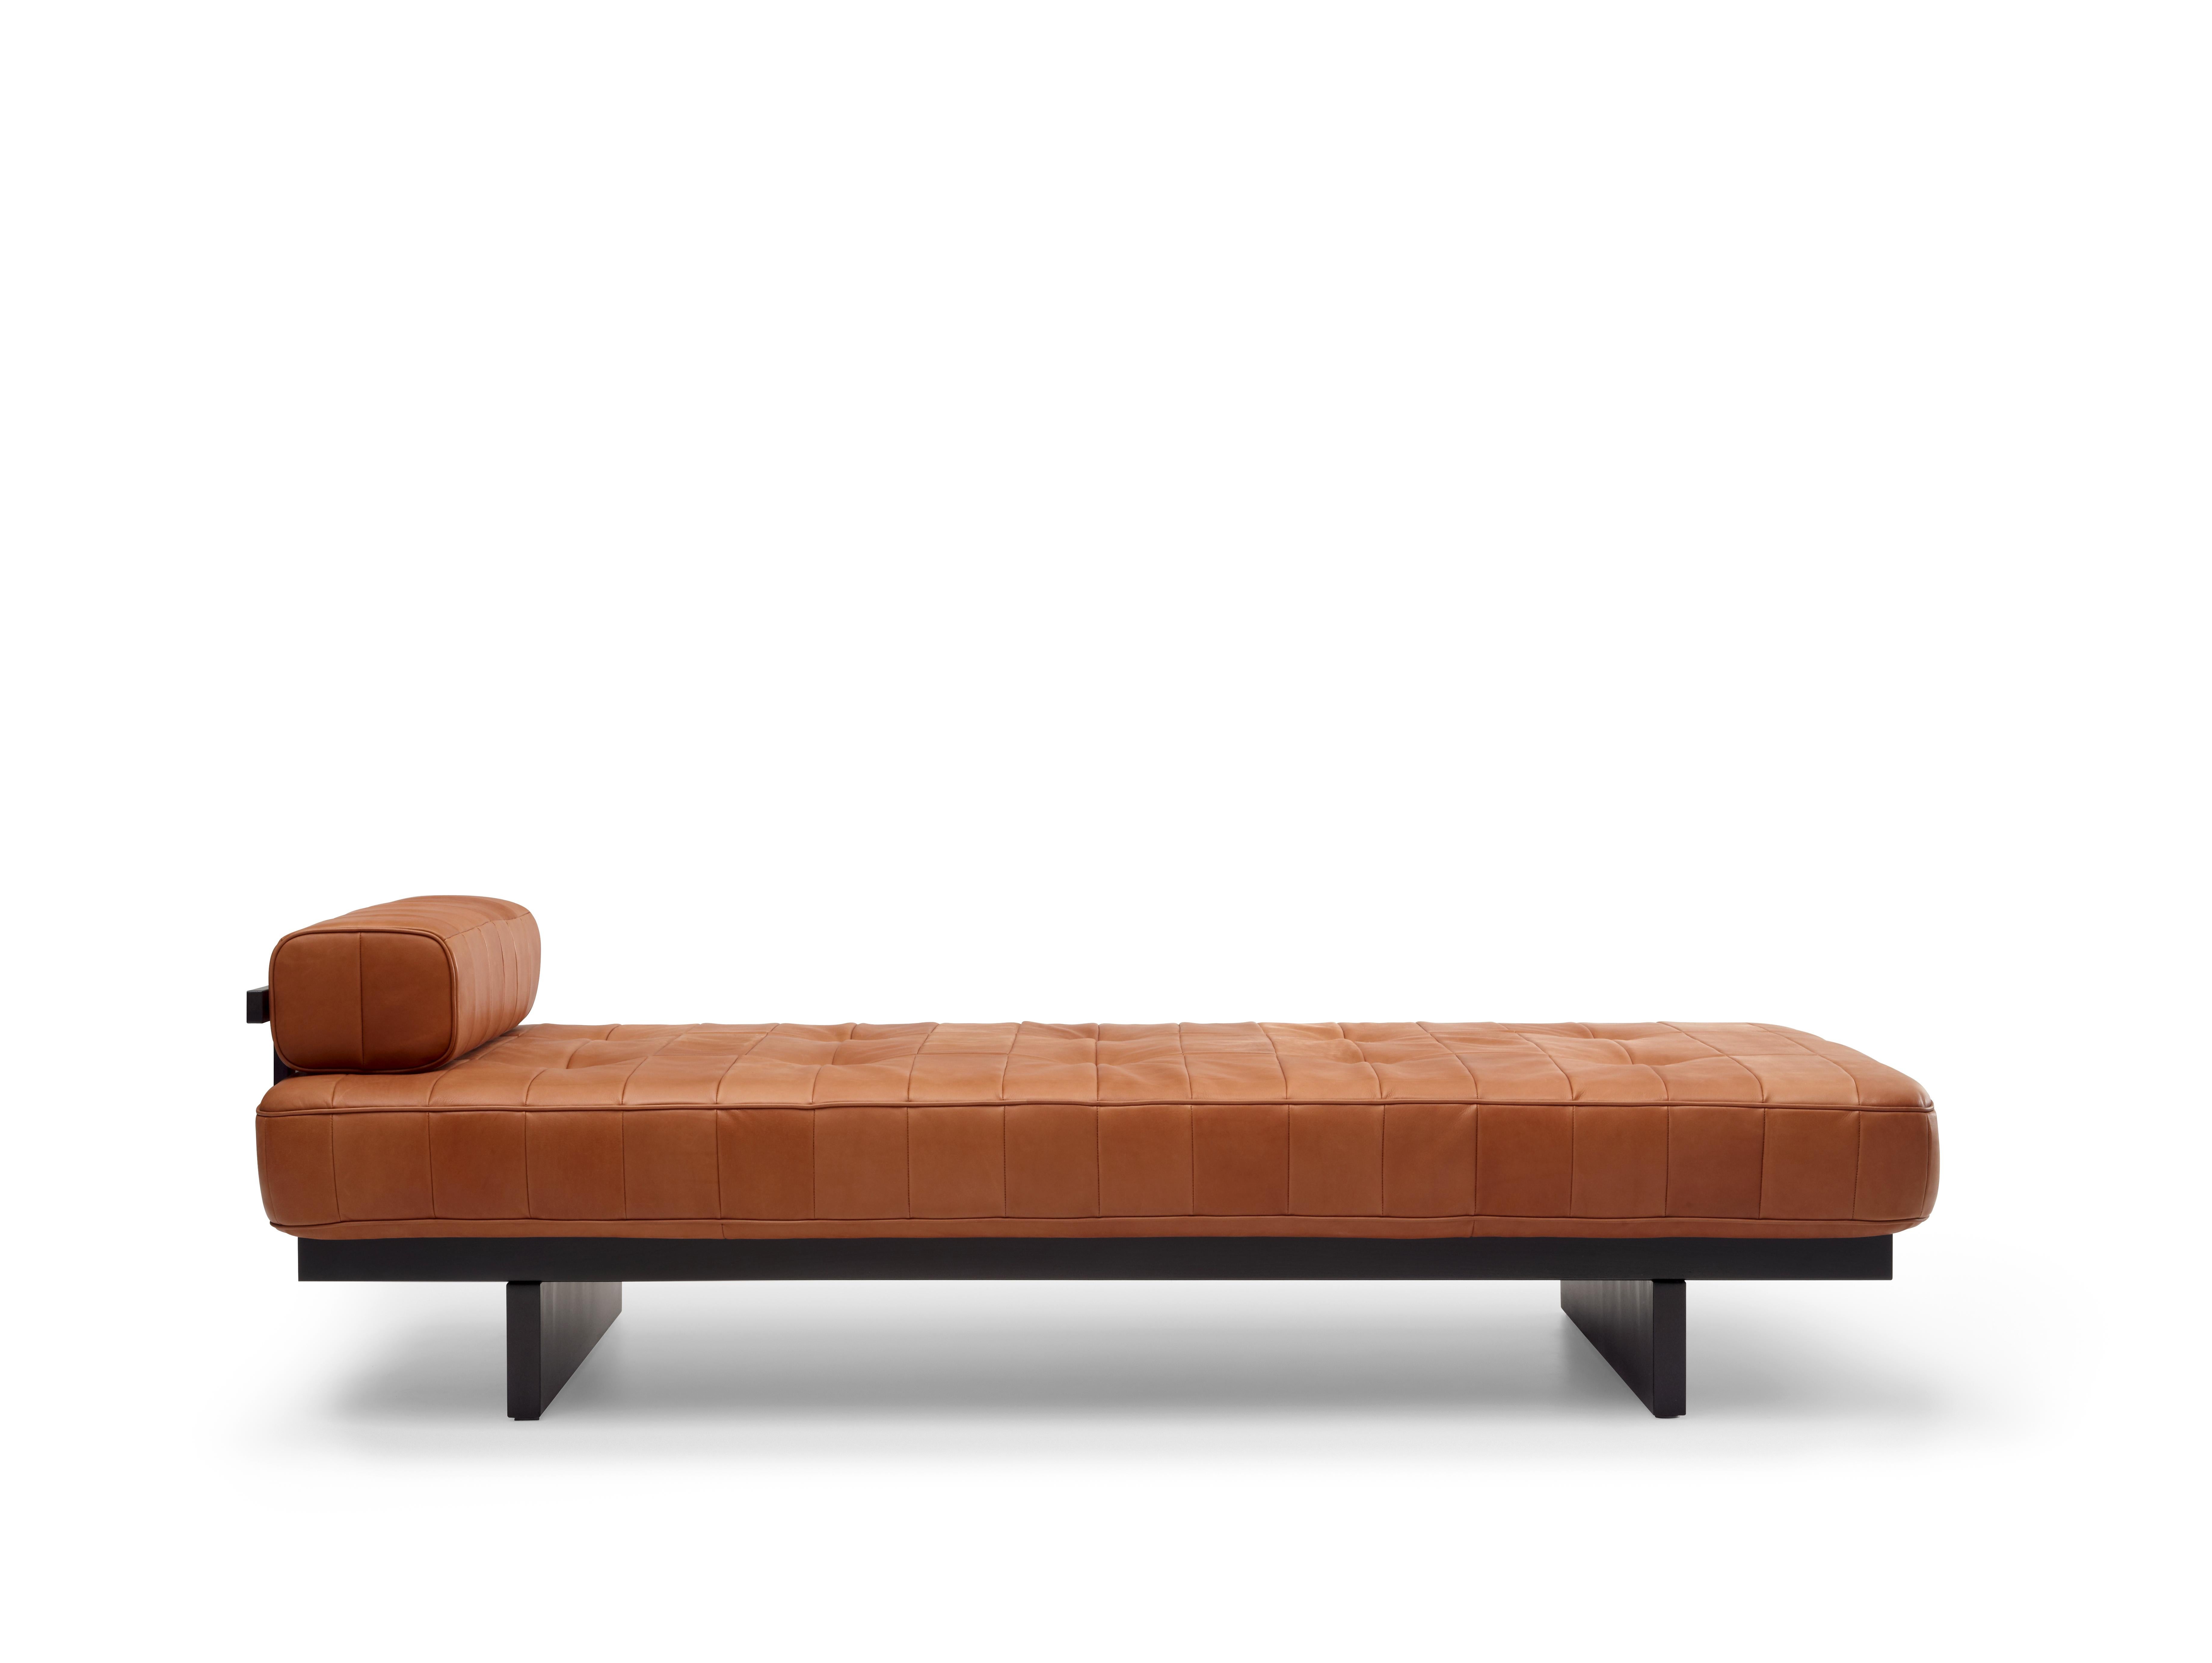 DS-80 daybed by De Sede
Dimensions: D 69 x W 202 x H 58 cm
Materials: Frame made of solid wood, lacquered in silk matt black. SEDEX upholstery with SEDE-Lux padding. 
Glides for hard and soft floor coverings.

Prices may change according to the